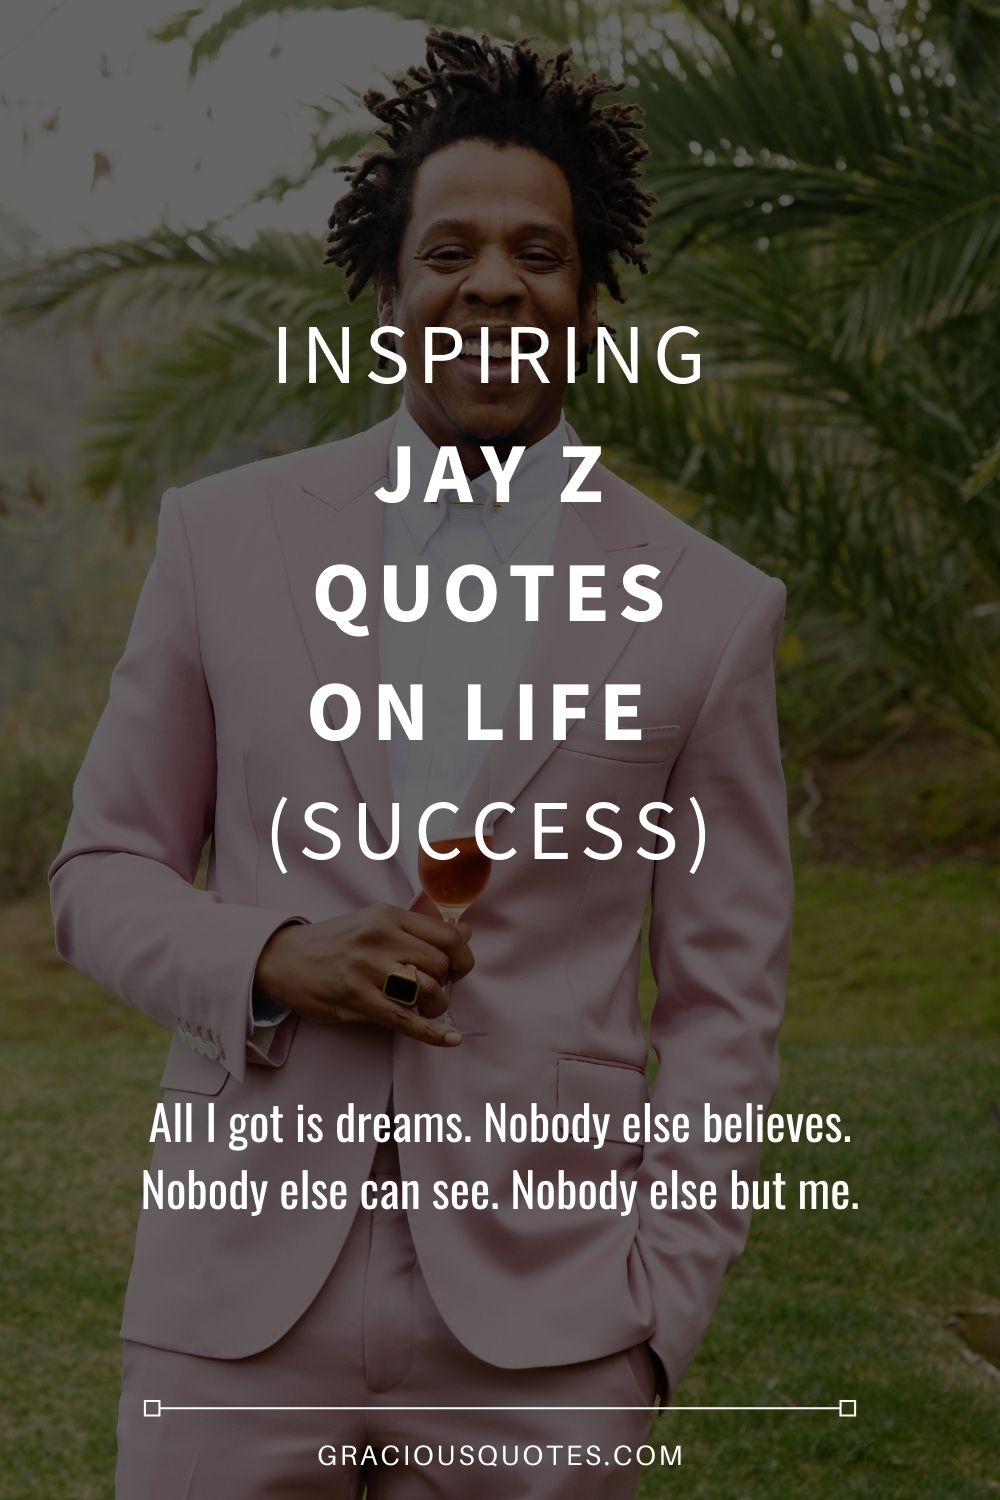 Inspiring Jay Z Quotes on Life (SUCCESS) - Gracious Quotes